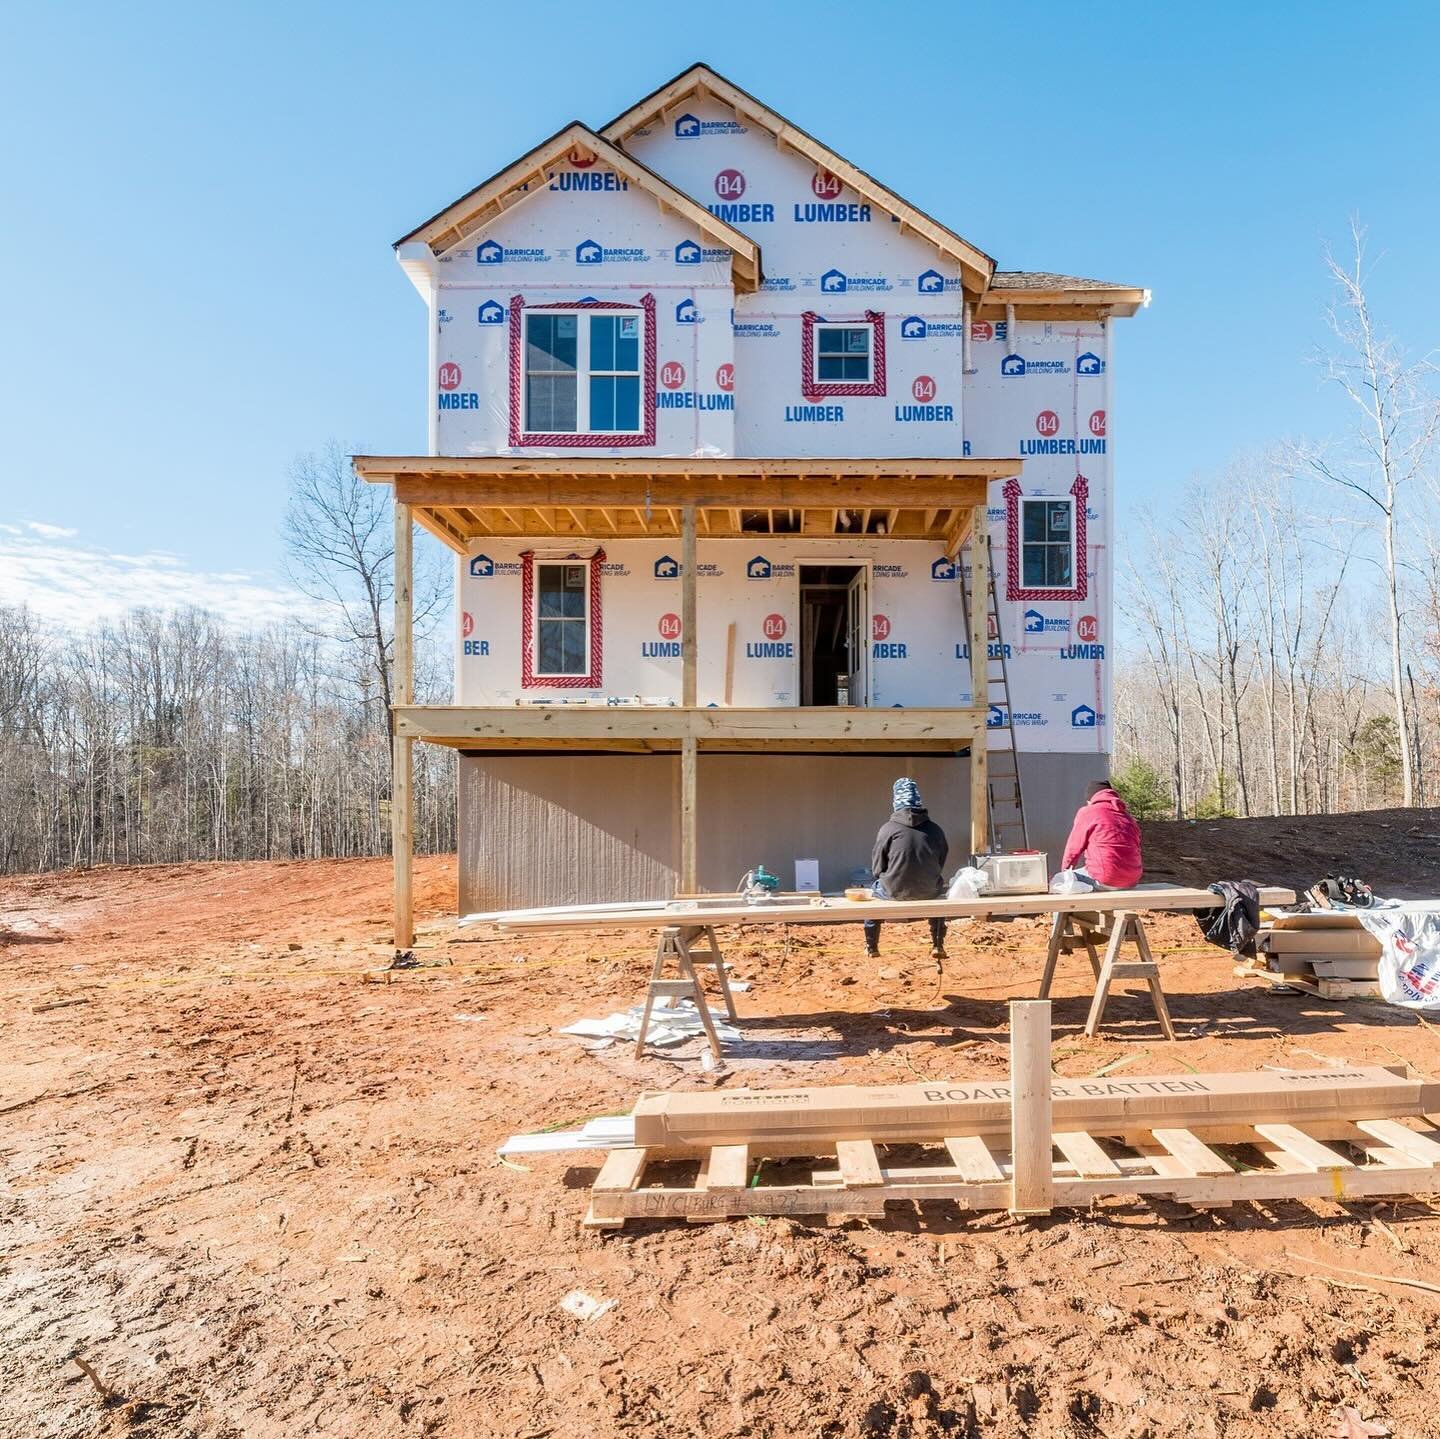 We love building homes and watching them come to life right before our eyes! This is one of our spec homes on Ned Brown Road, and we&rsquo;re thrilled with how it turned out. Witnessing the transformation from a basic structure to this stunning desig